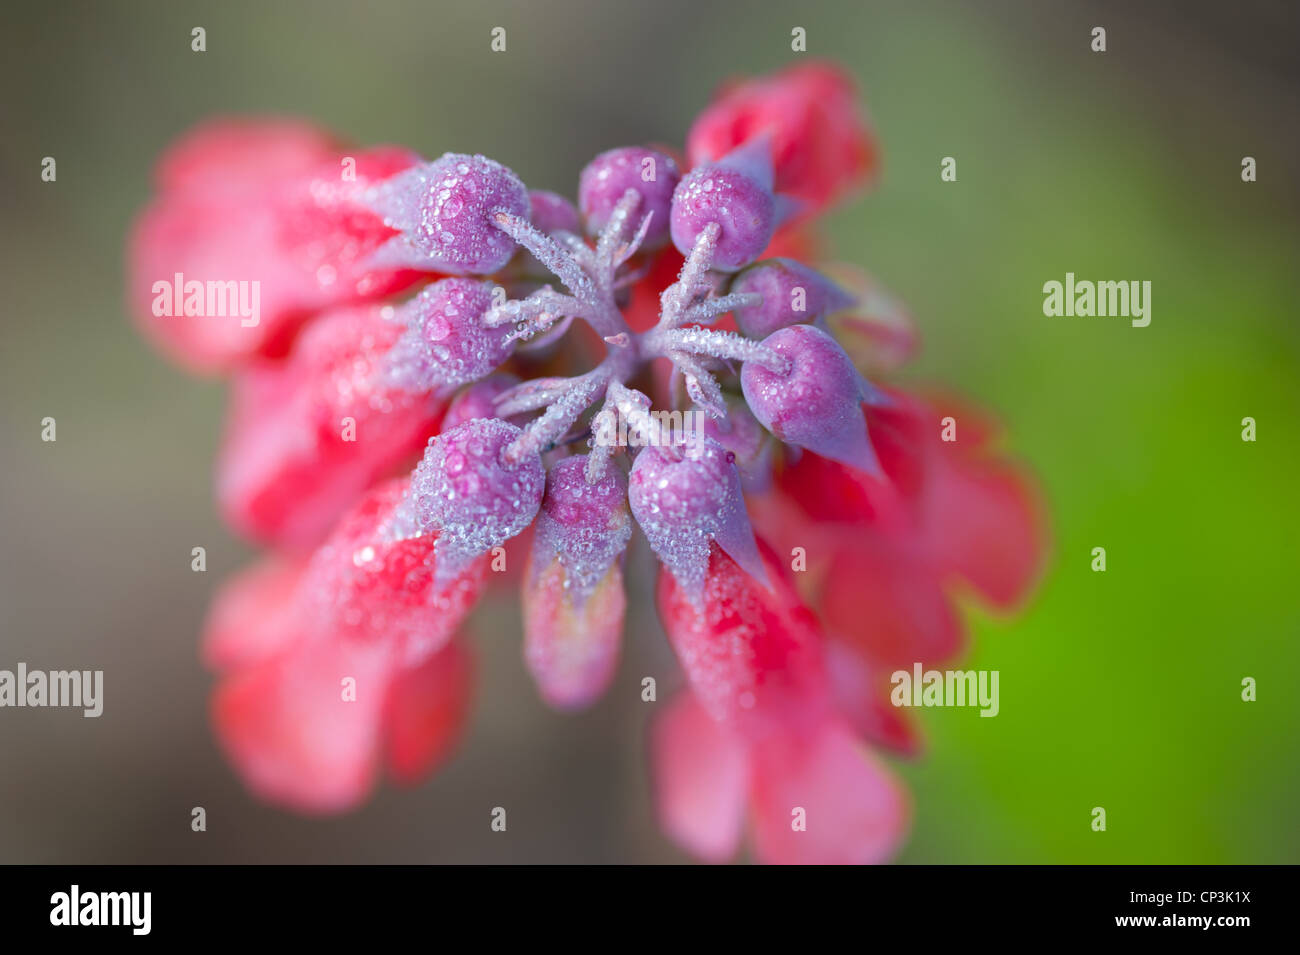 Pink bell-shaped petals on flower stem Stock Photo